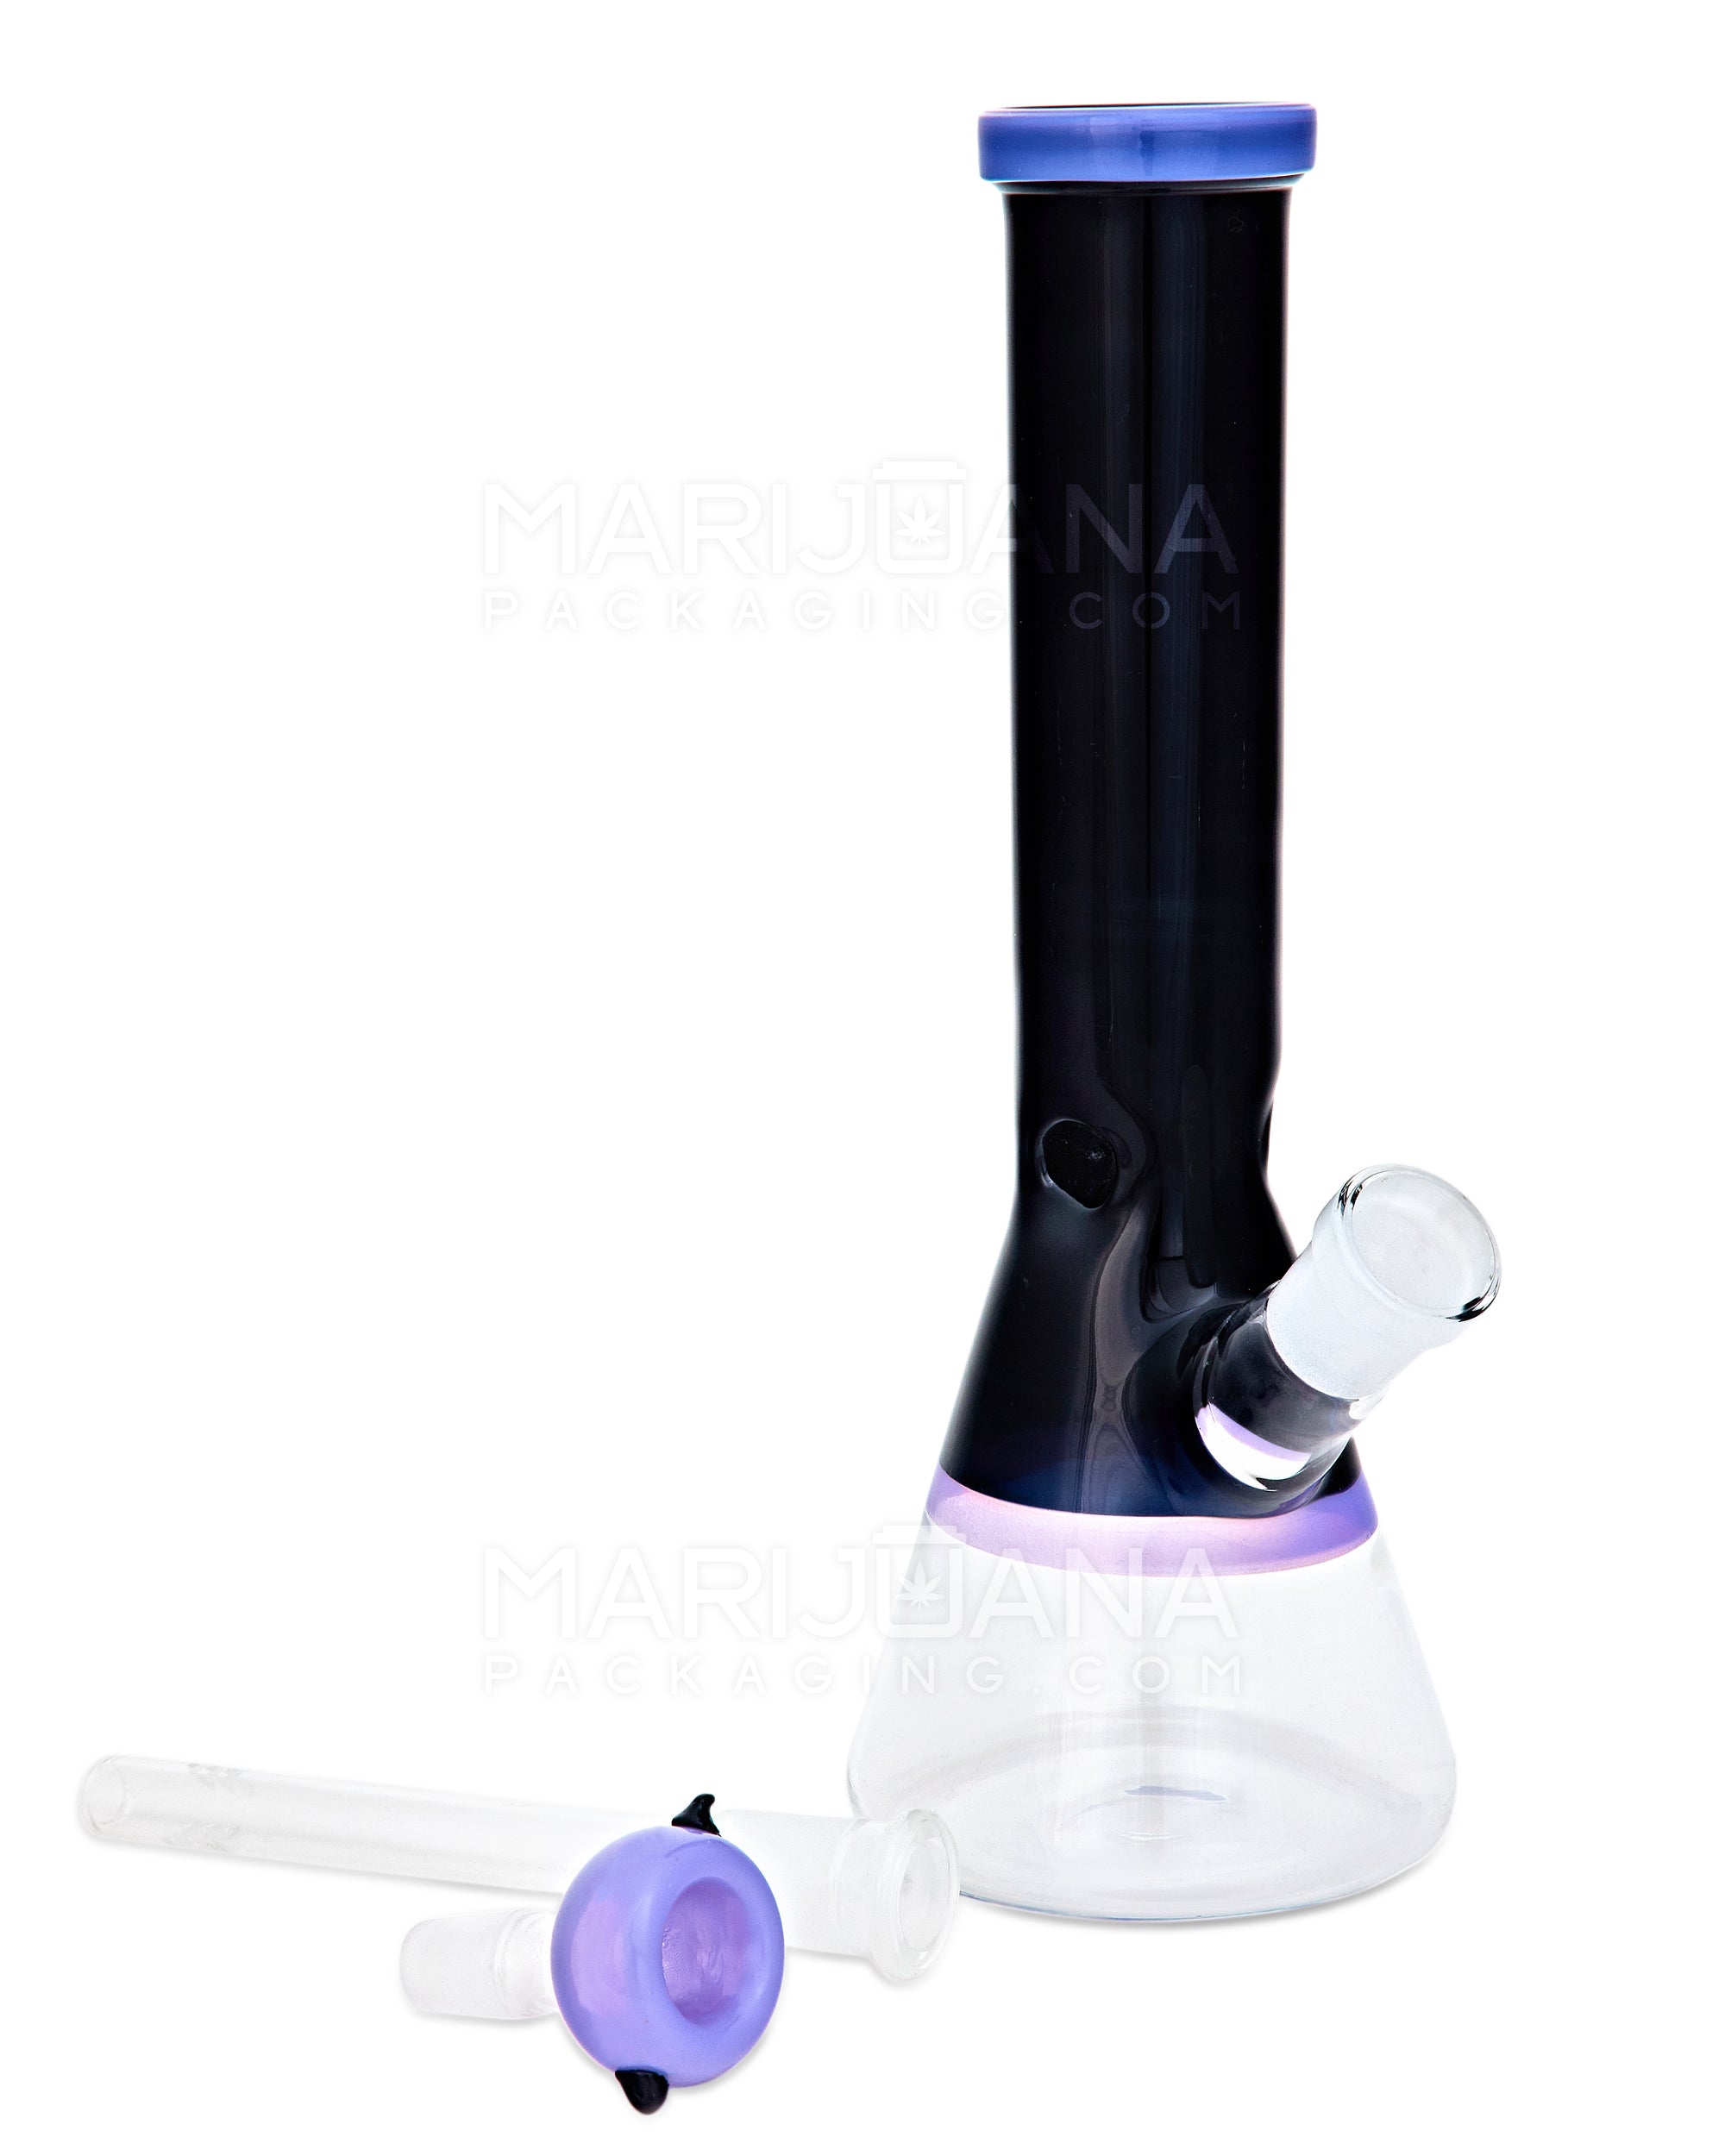 Painted Straight Neck Diffused Downstem Glass Beaker Water Pipe | 10in Tall - 14mm Bowl - Purple & Black - 2